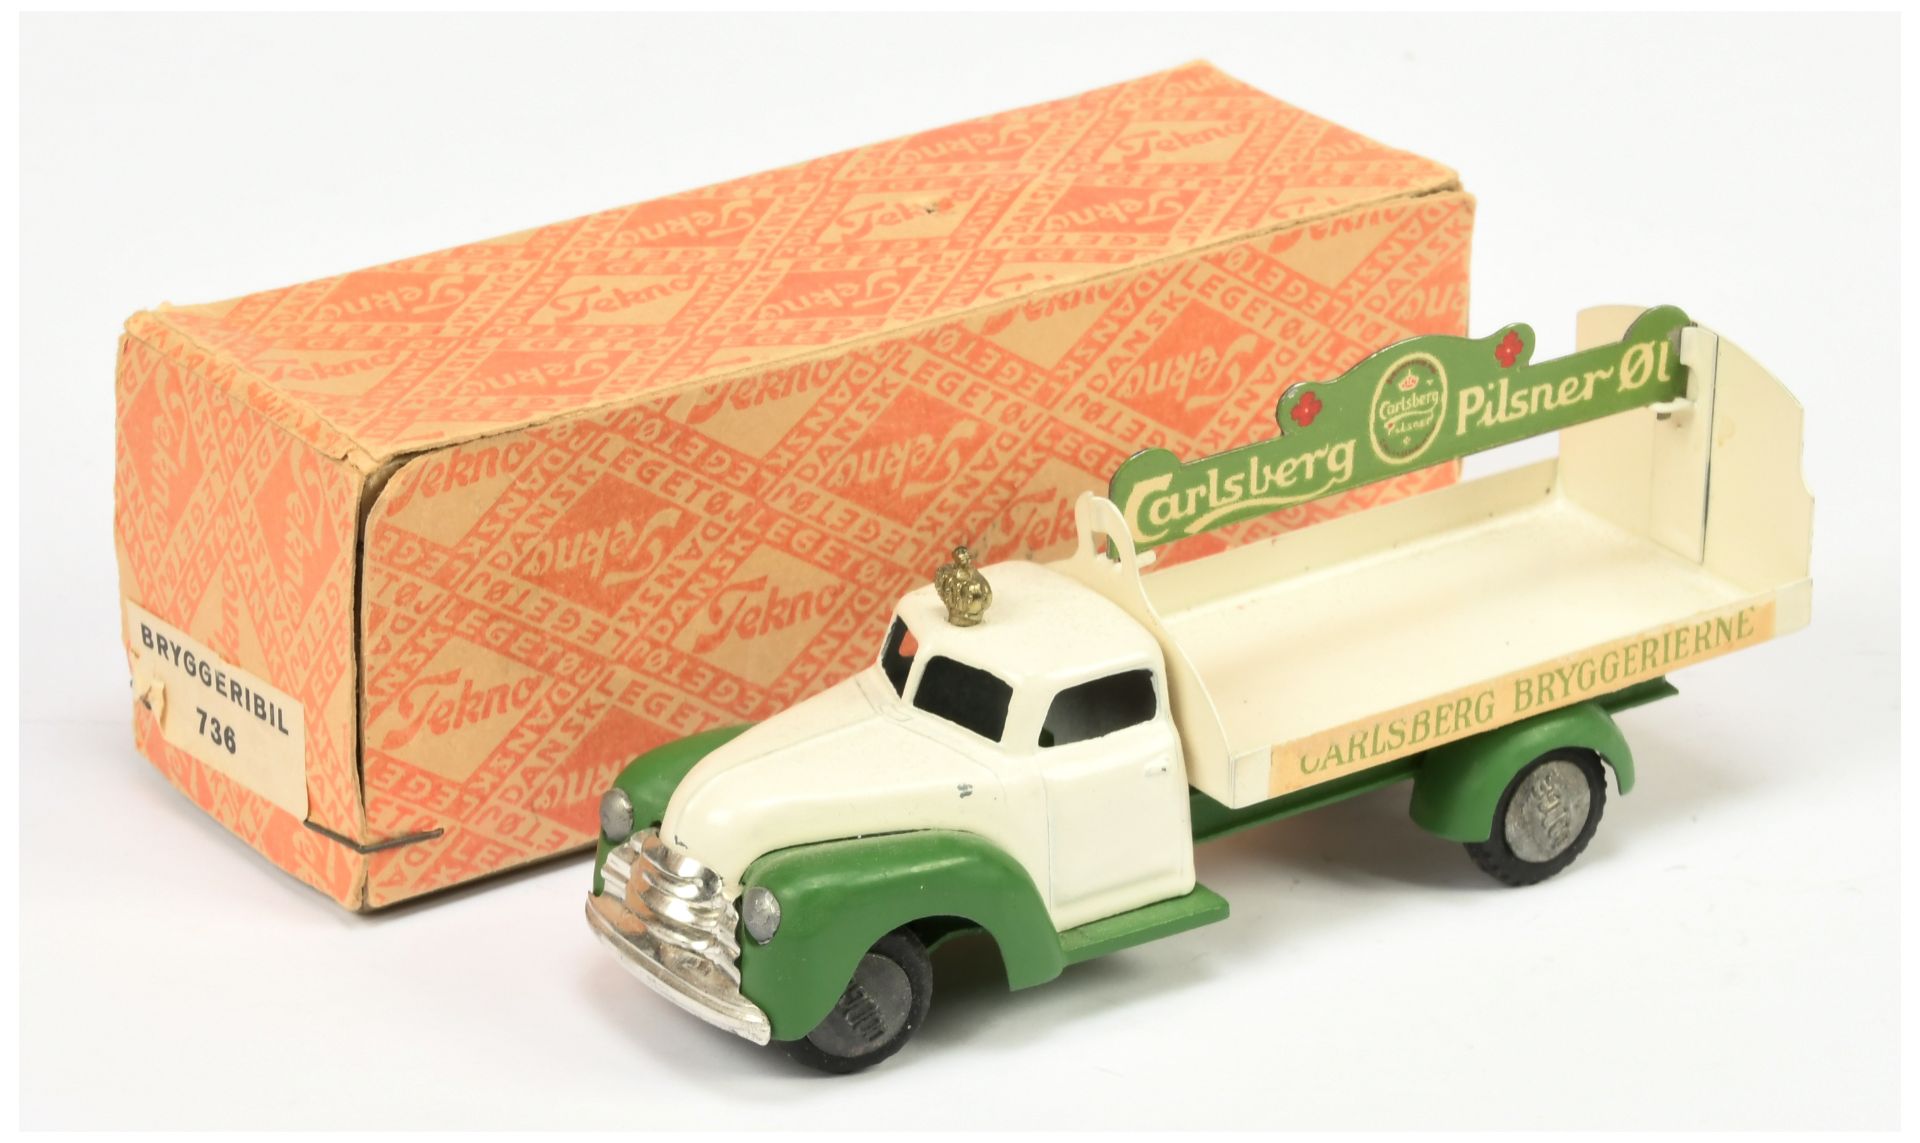 Tekno 736 Dodge "Carlsberg" Delivery Truck - White and Green, chrome trim - Good Plus without loa...